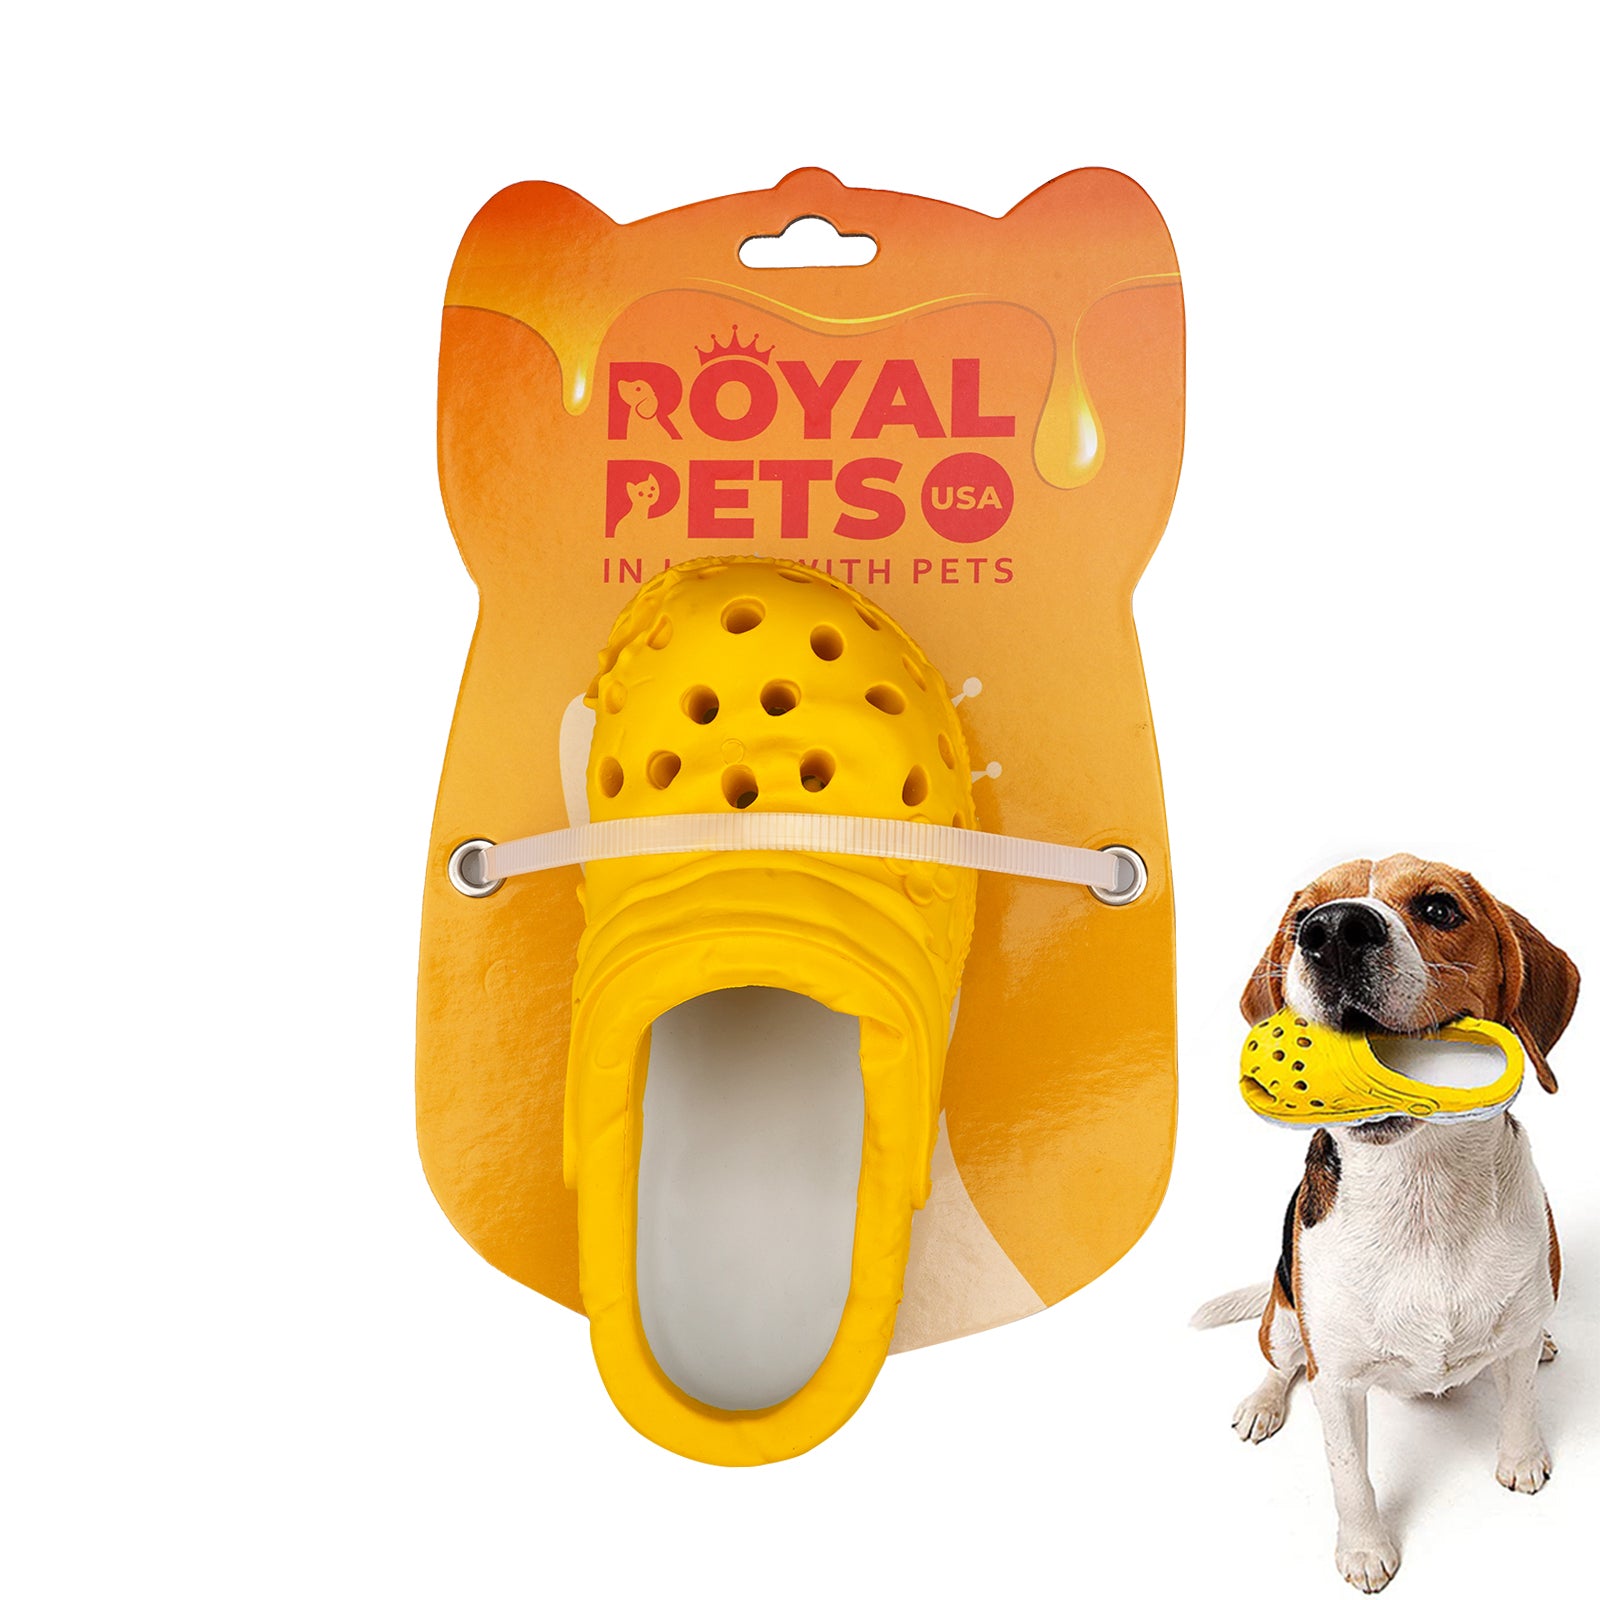 ROYAL PETS USA Indestructible, Durable & Tough Orange Dog Chew Toy for  Aggressive Chewers. Slow Treat Dispensing Interactive Toys for Small,  Medium 